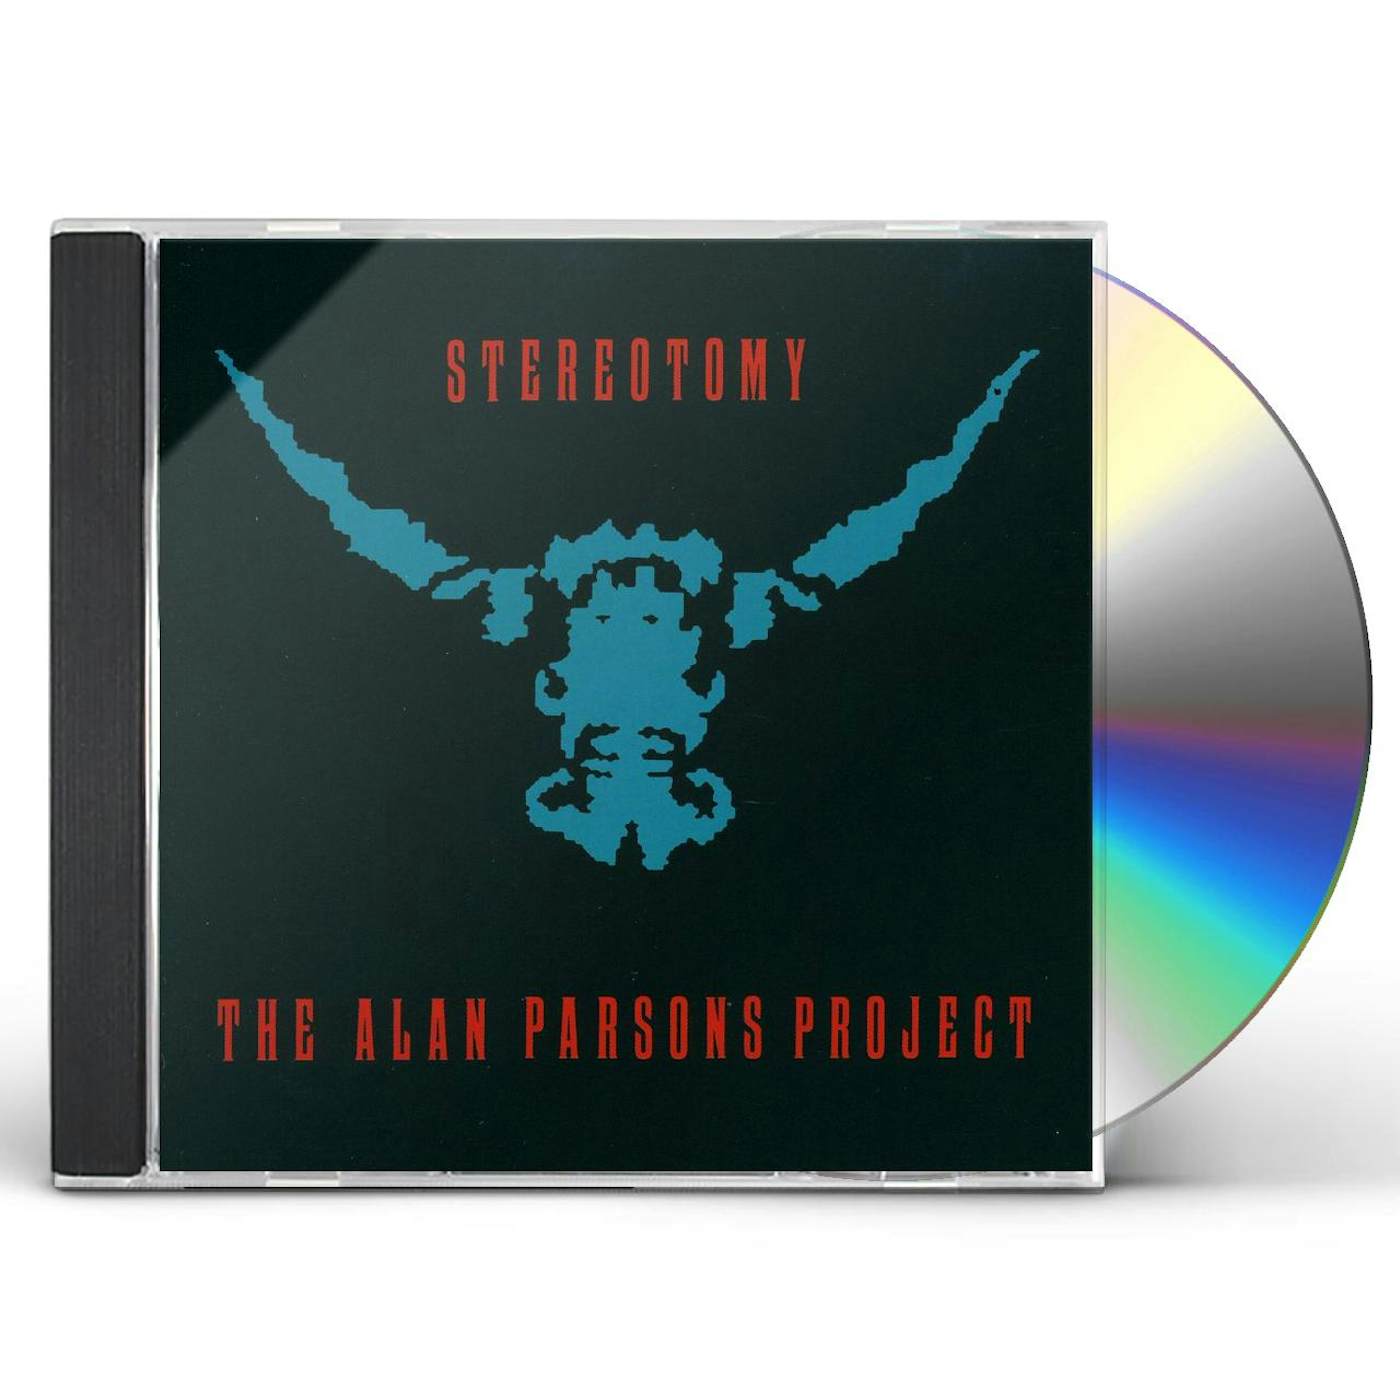 The Alan Parsons Project STEREOTOMY CD